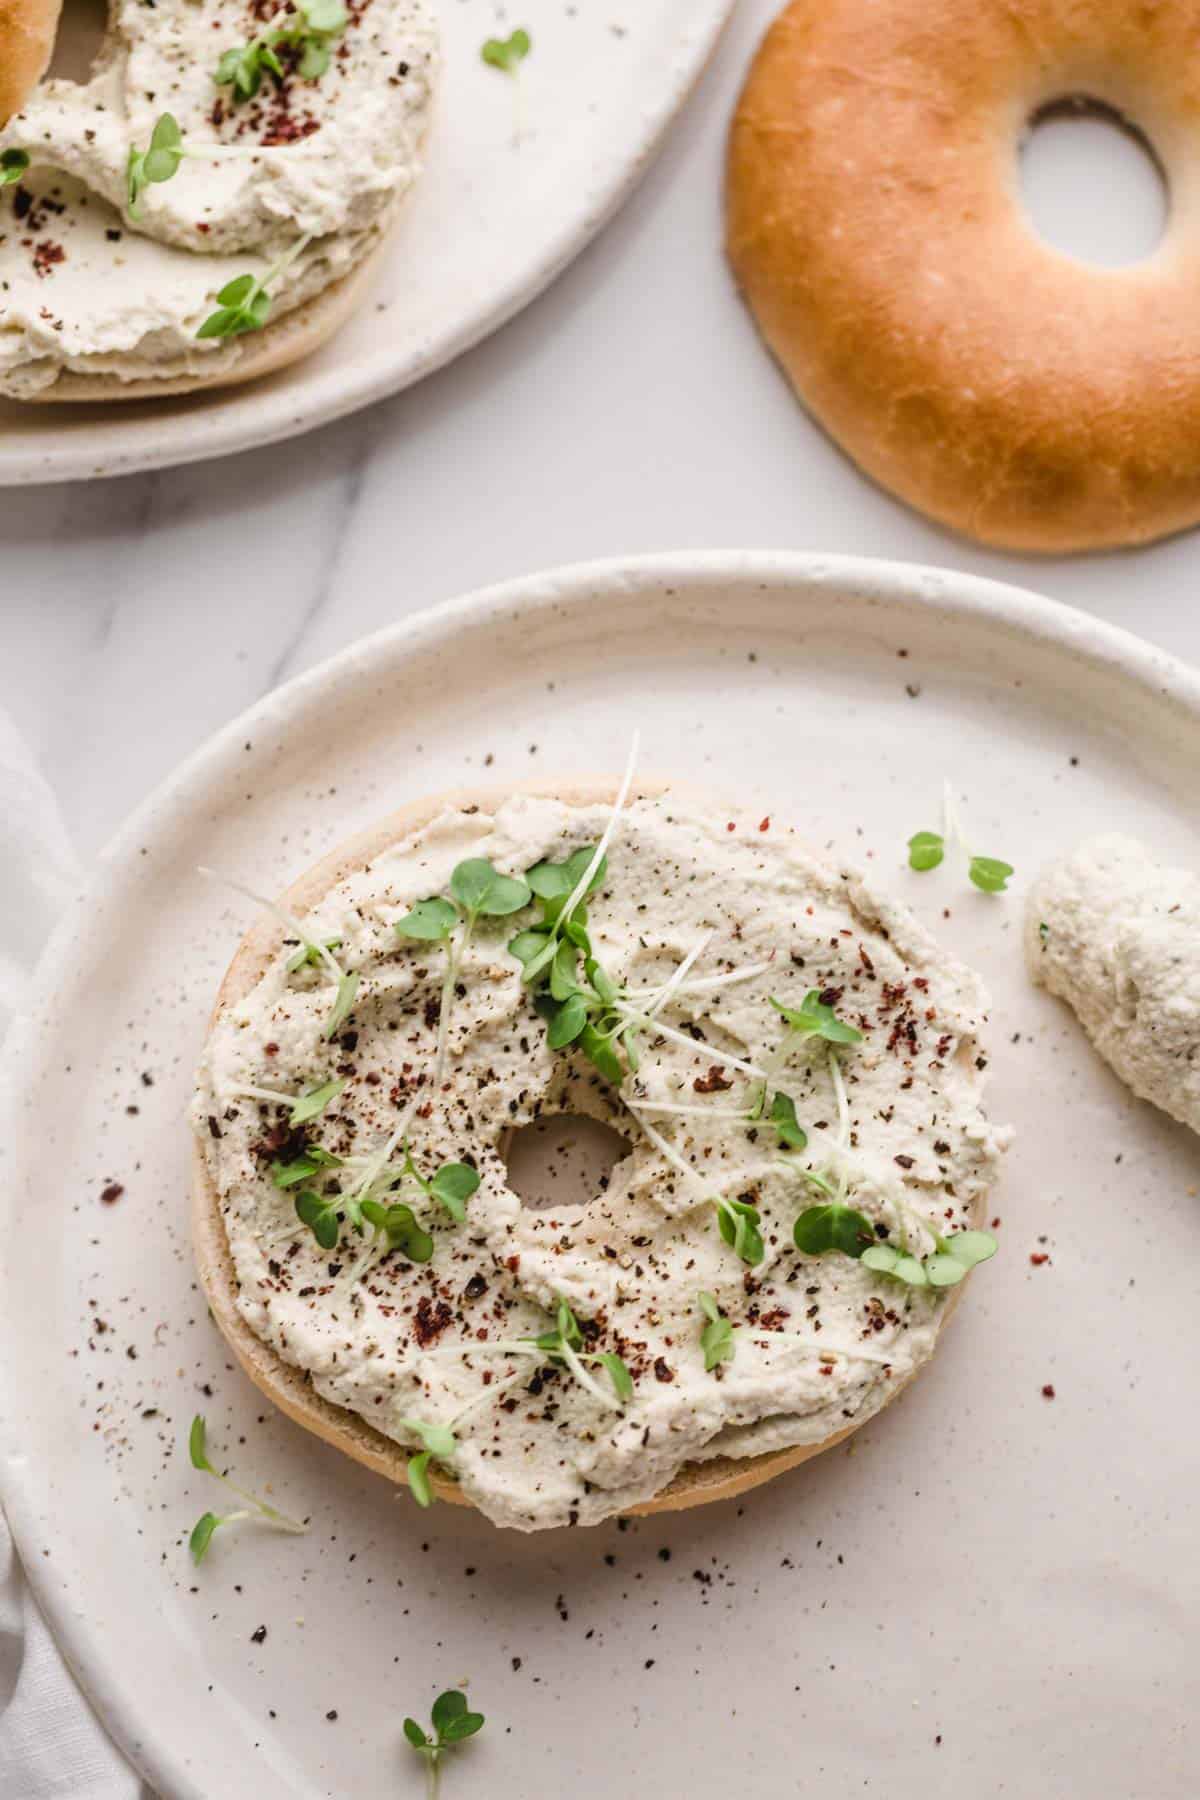 Cream cheese on a bagel with water cress, and sumac